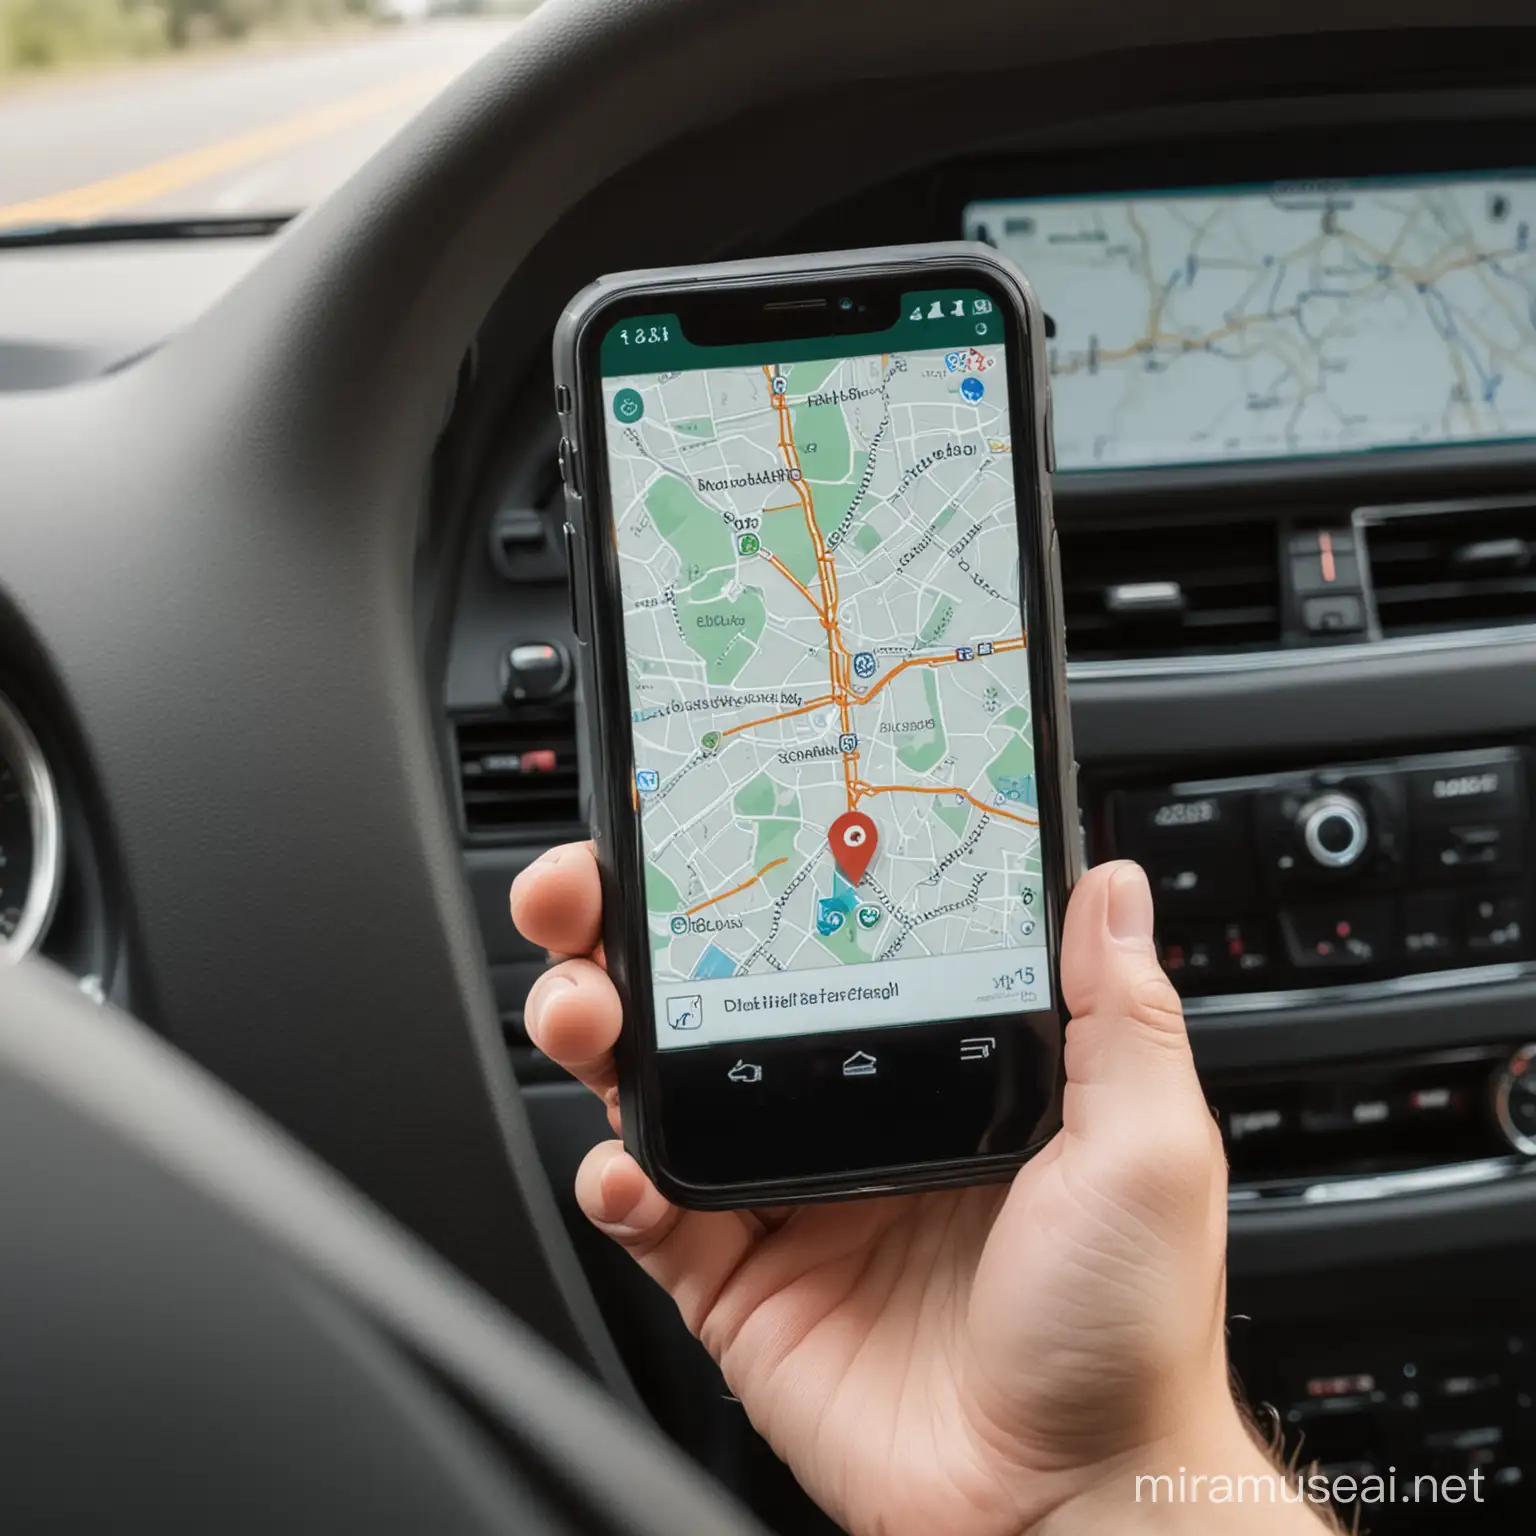 
Cell phone inside a car with GPS pointing to a specific delivery route for biological material